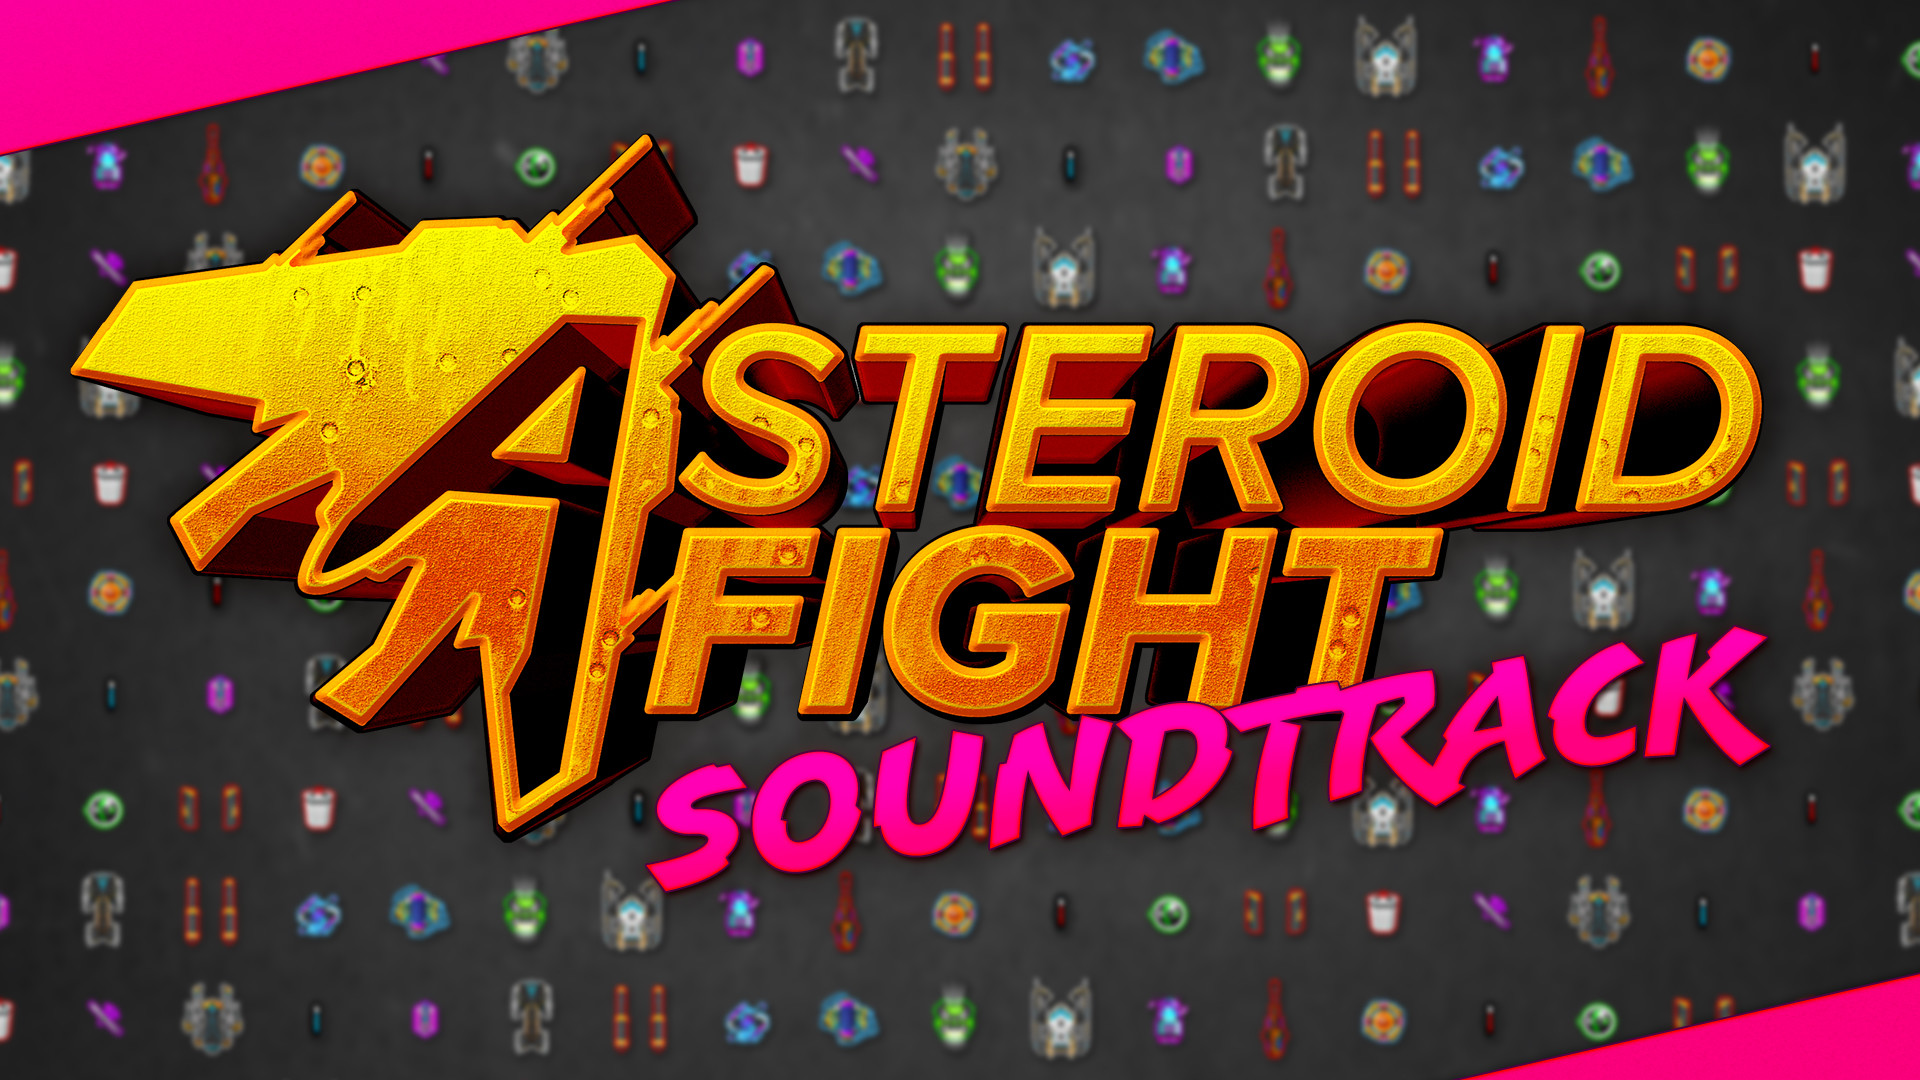 Asteroid Fight Soundtrack Featured Screenshot #1